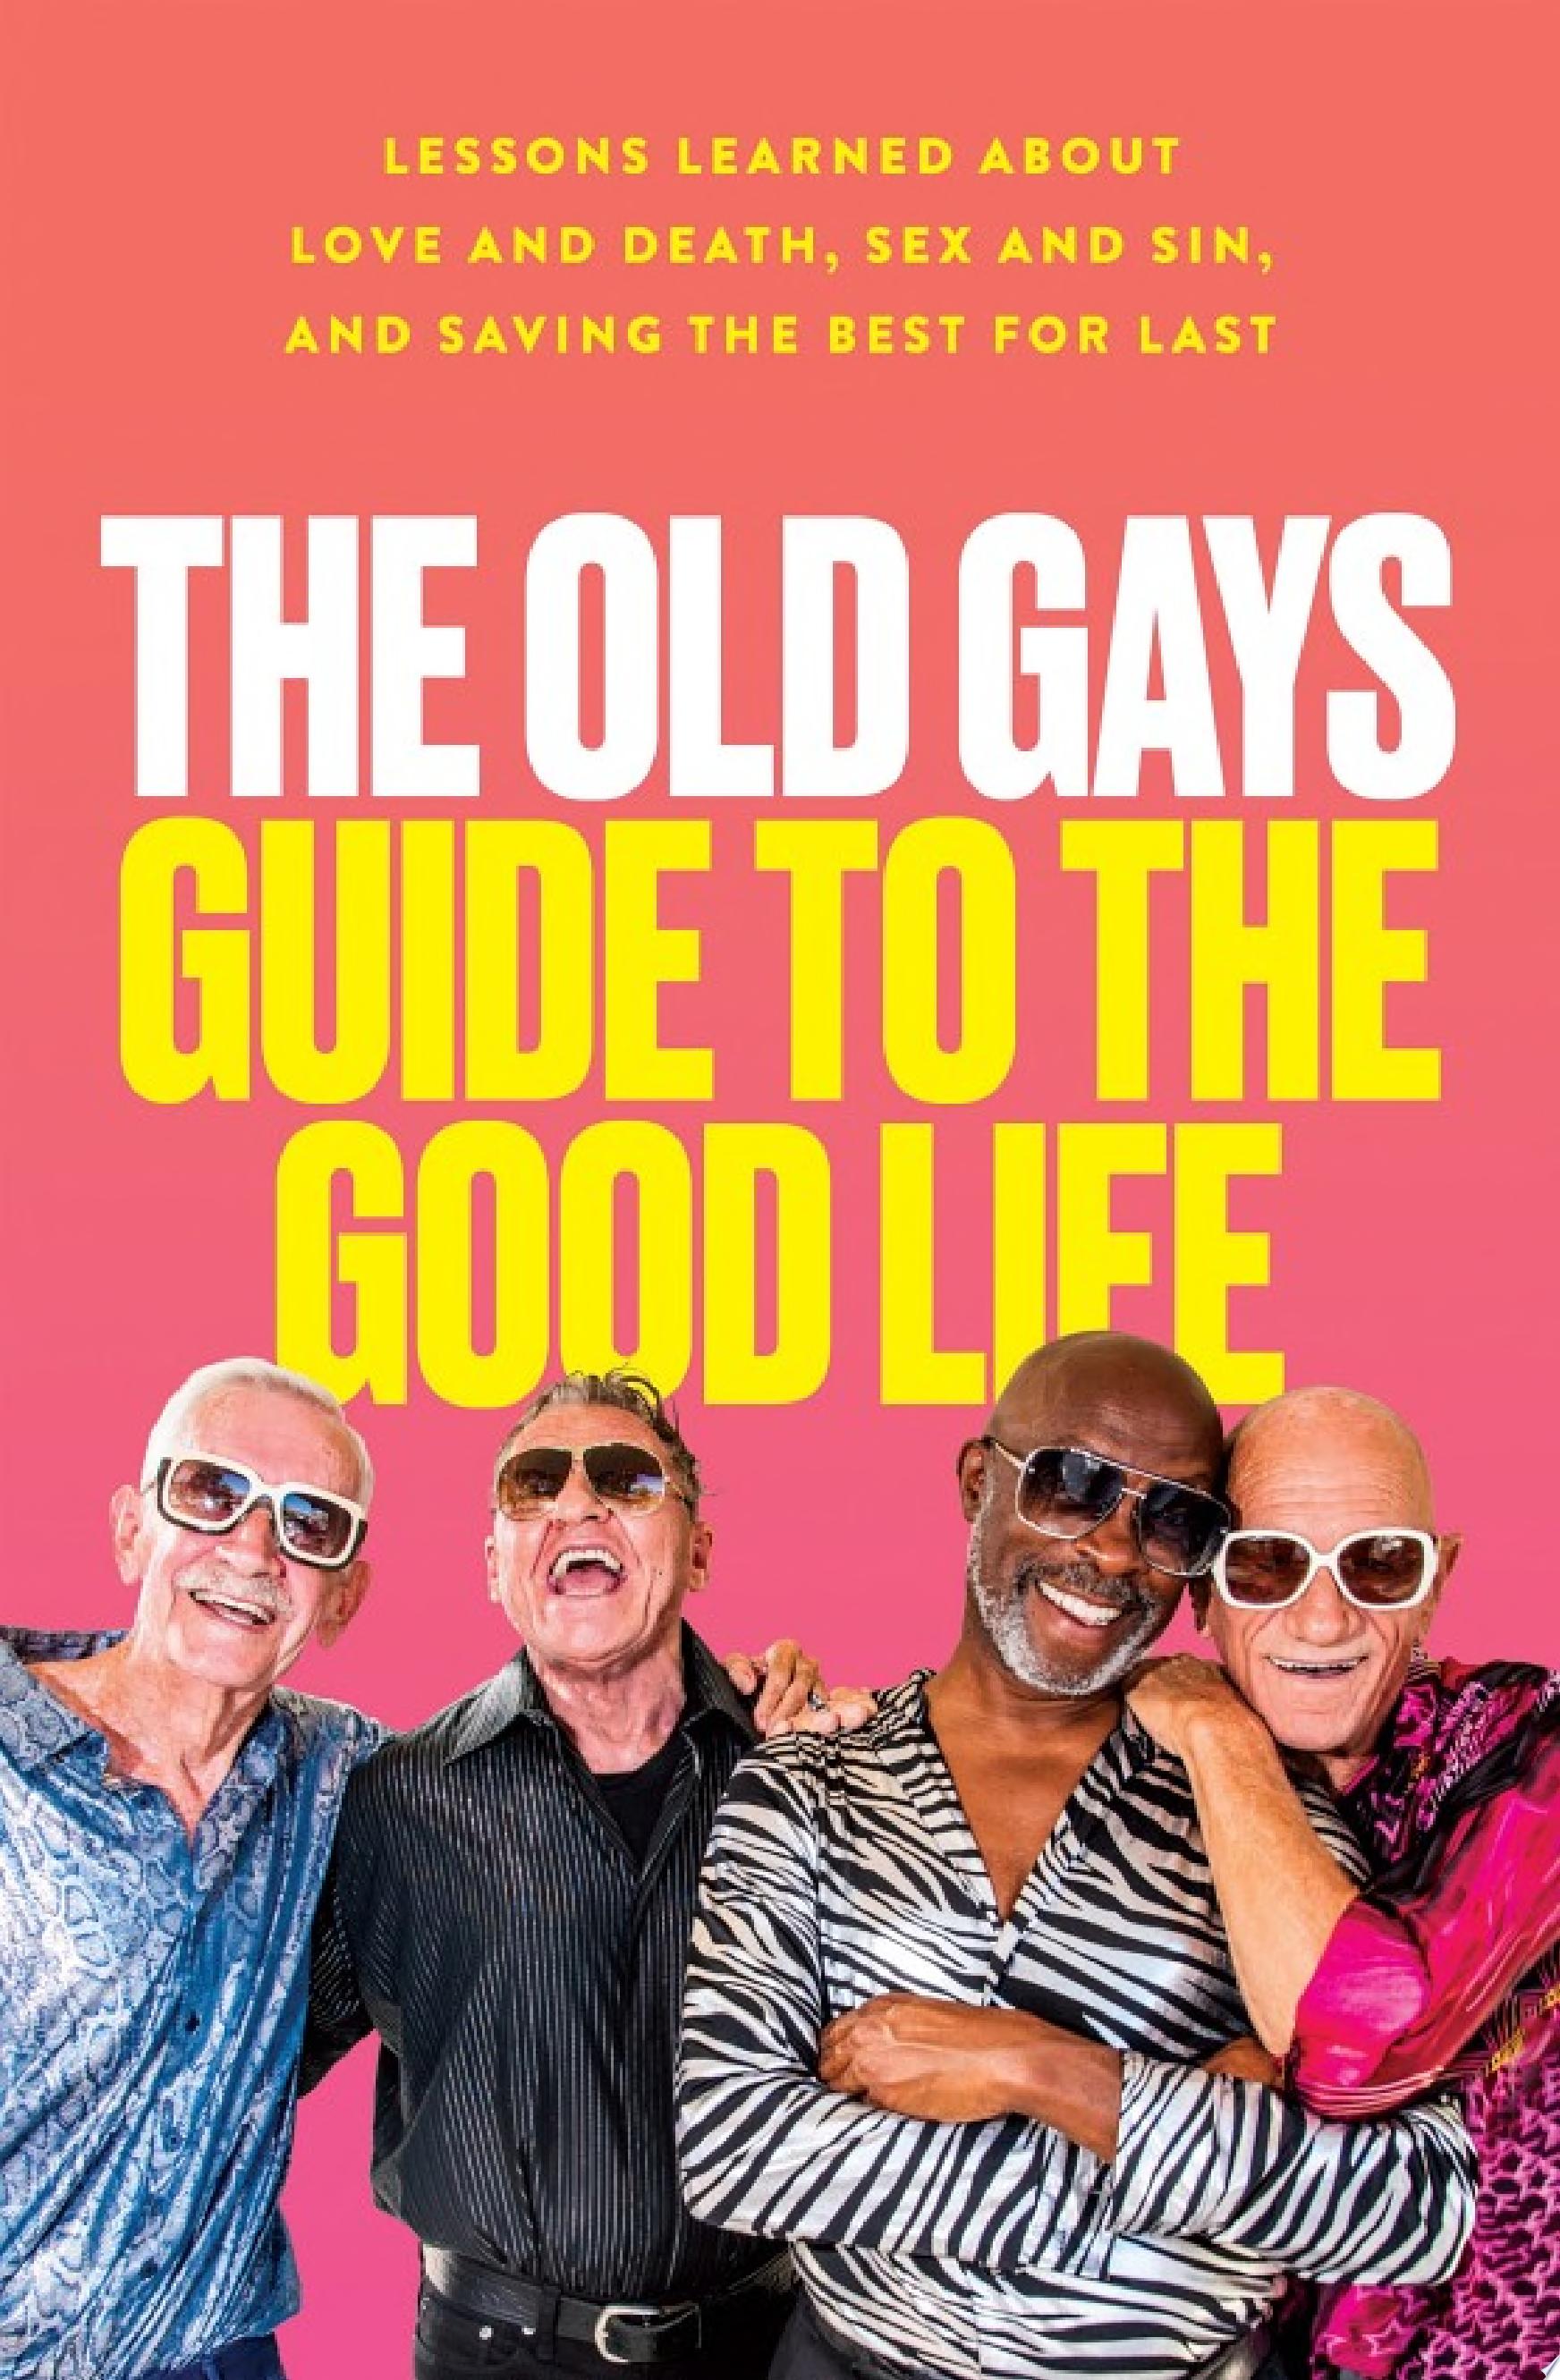 Image for "The Old Gays Guide to the Good Life"